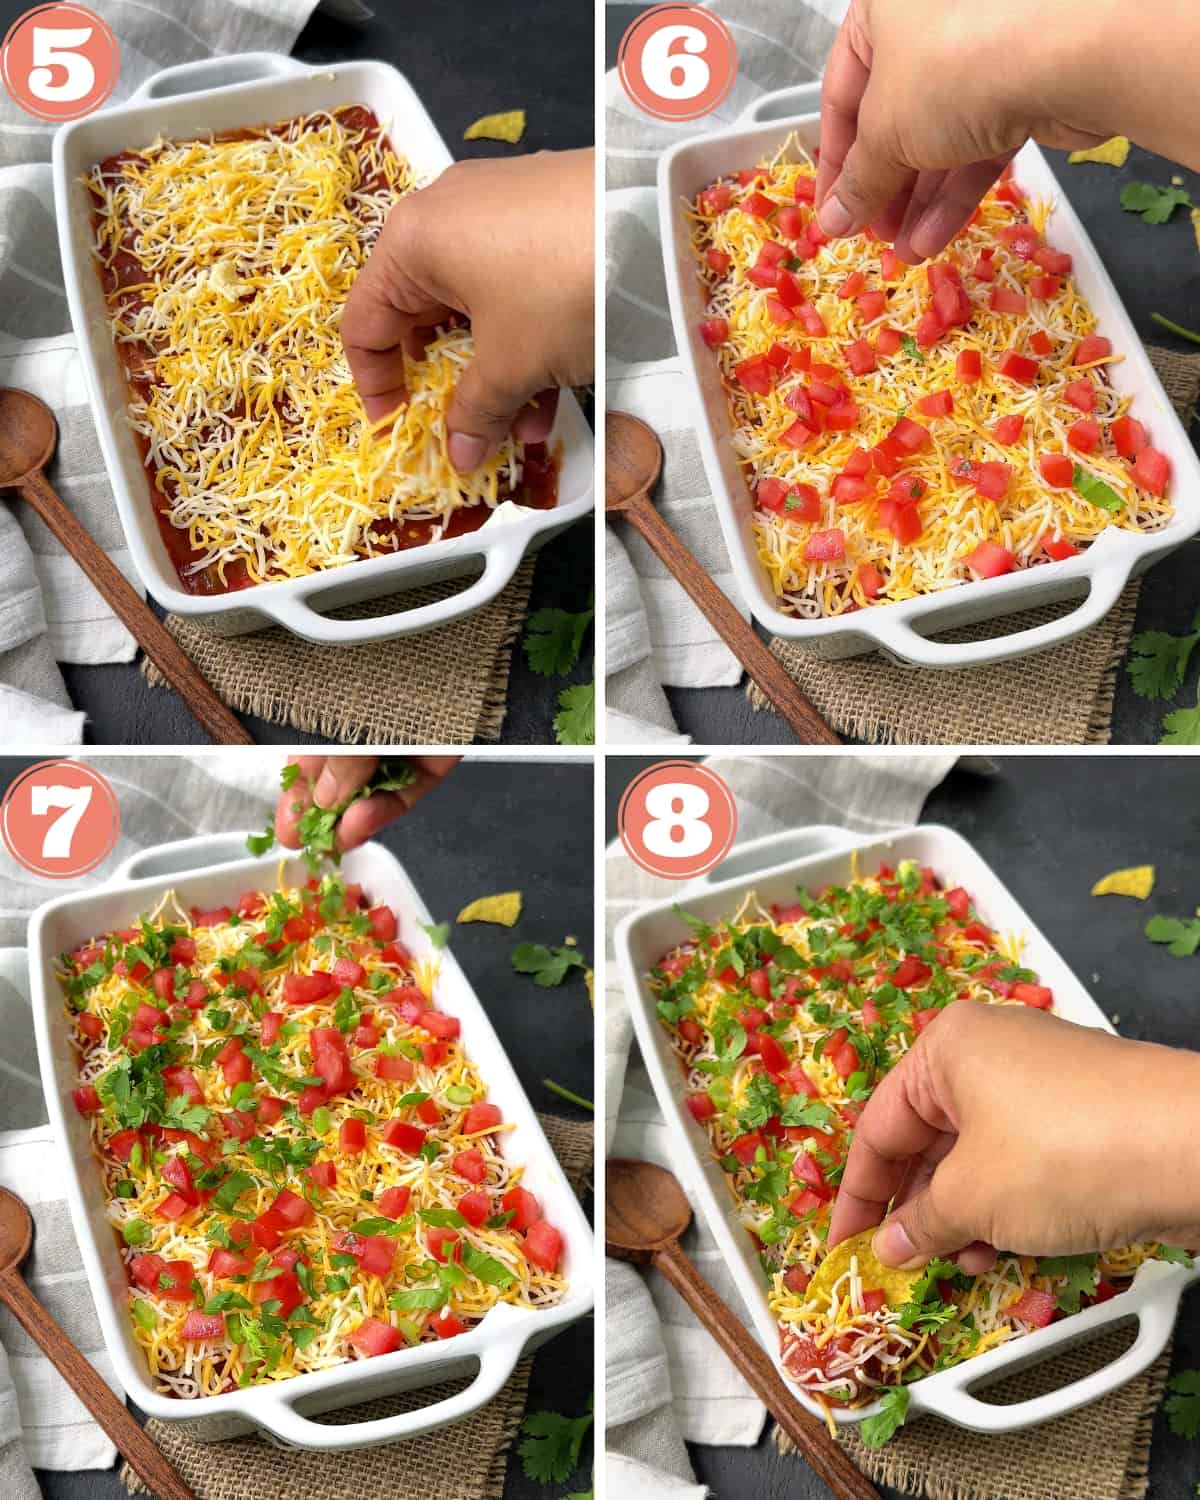 4-image grid showing steps 5 to 8 layering a mexican dip